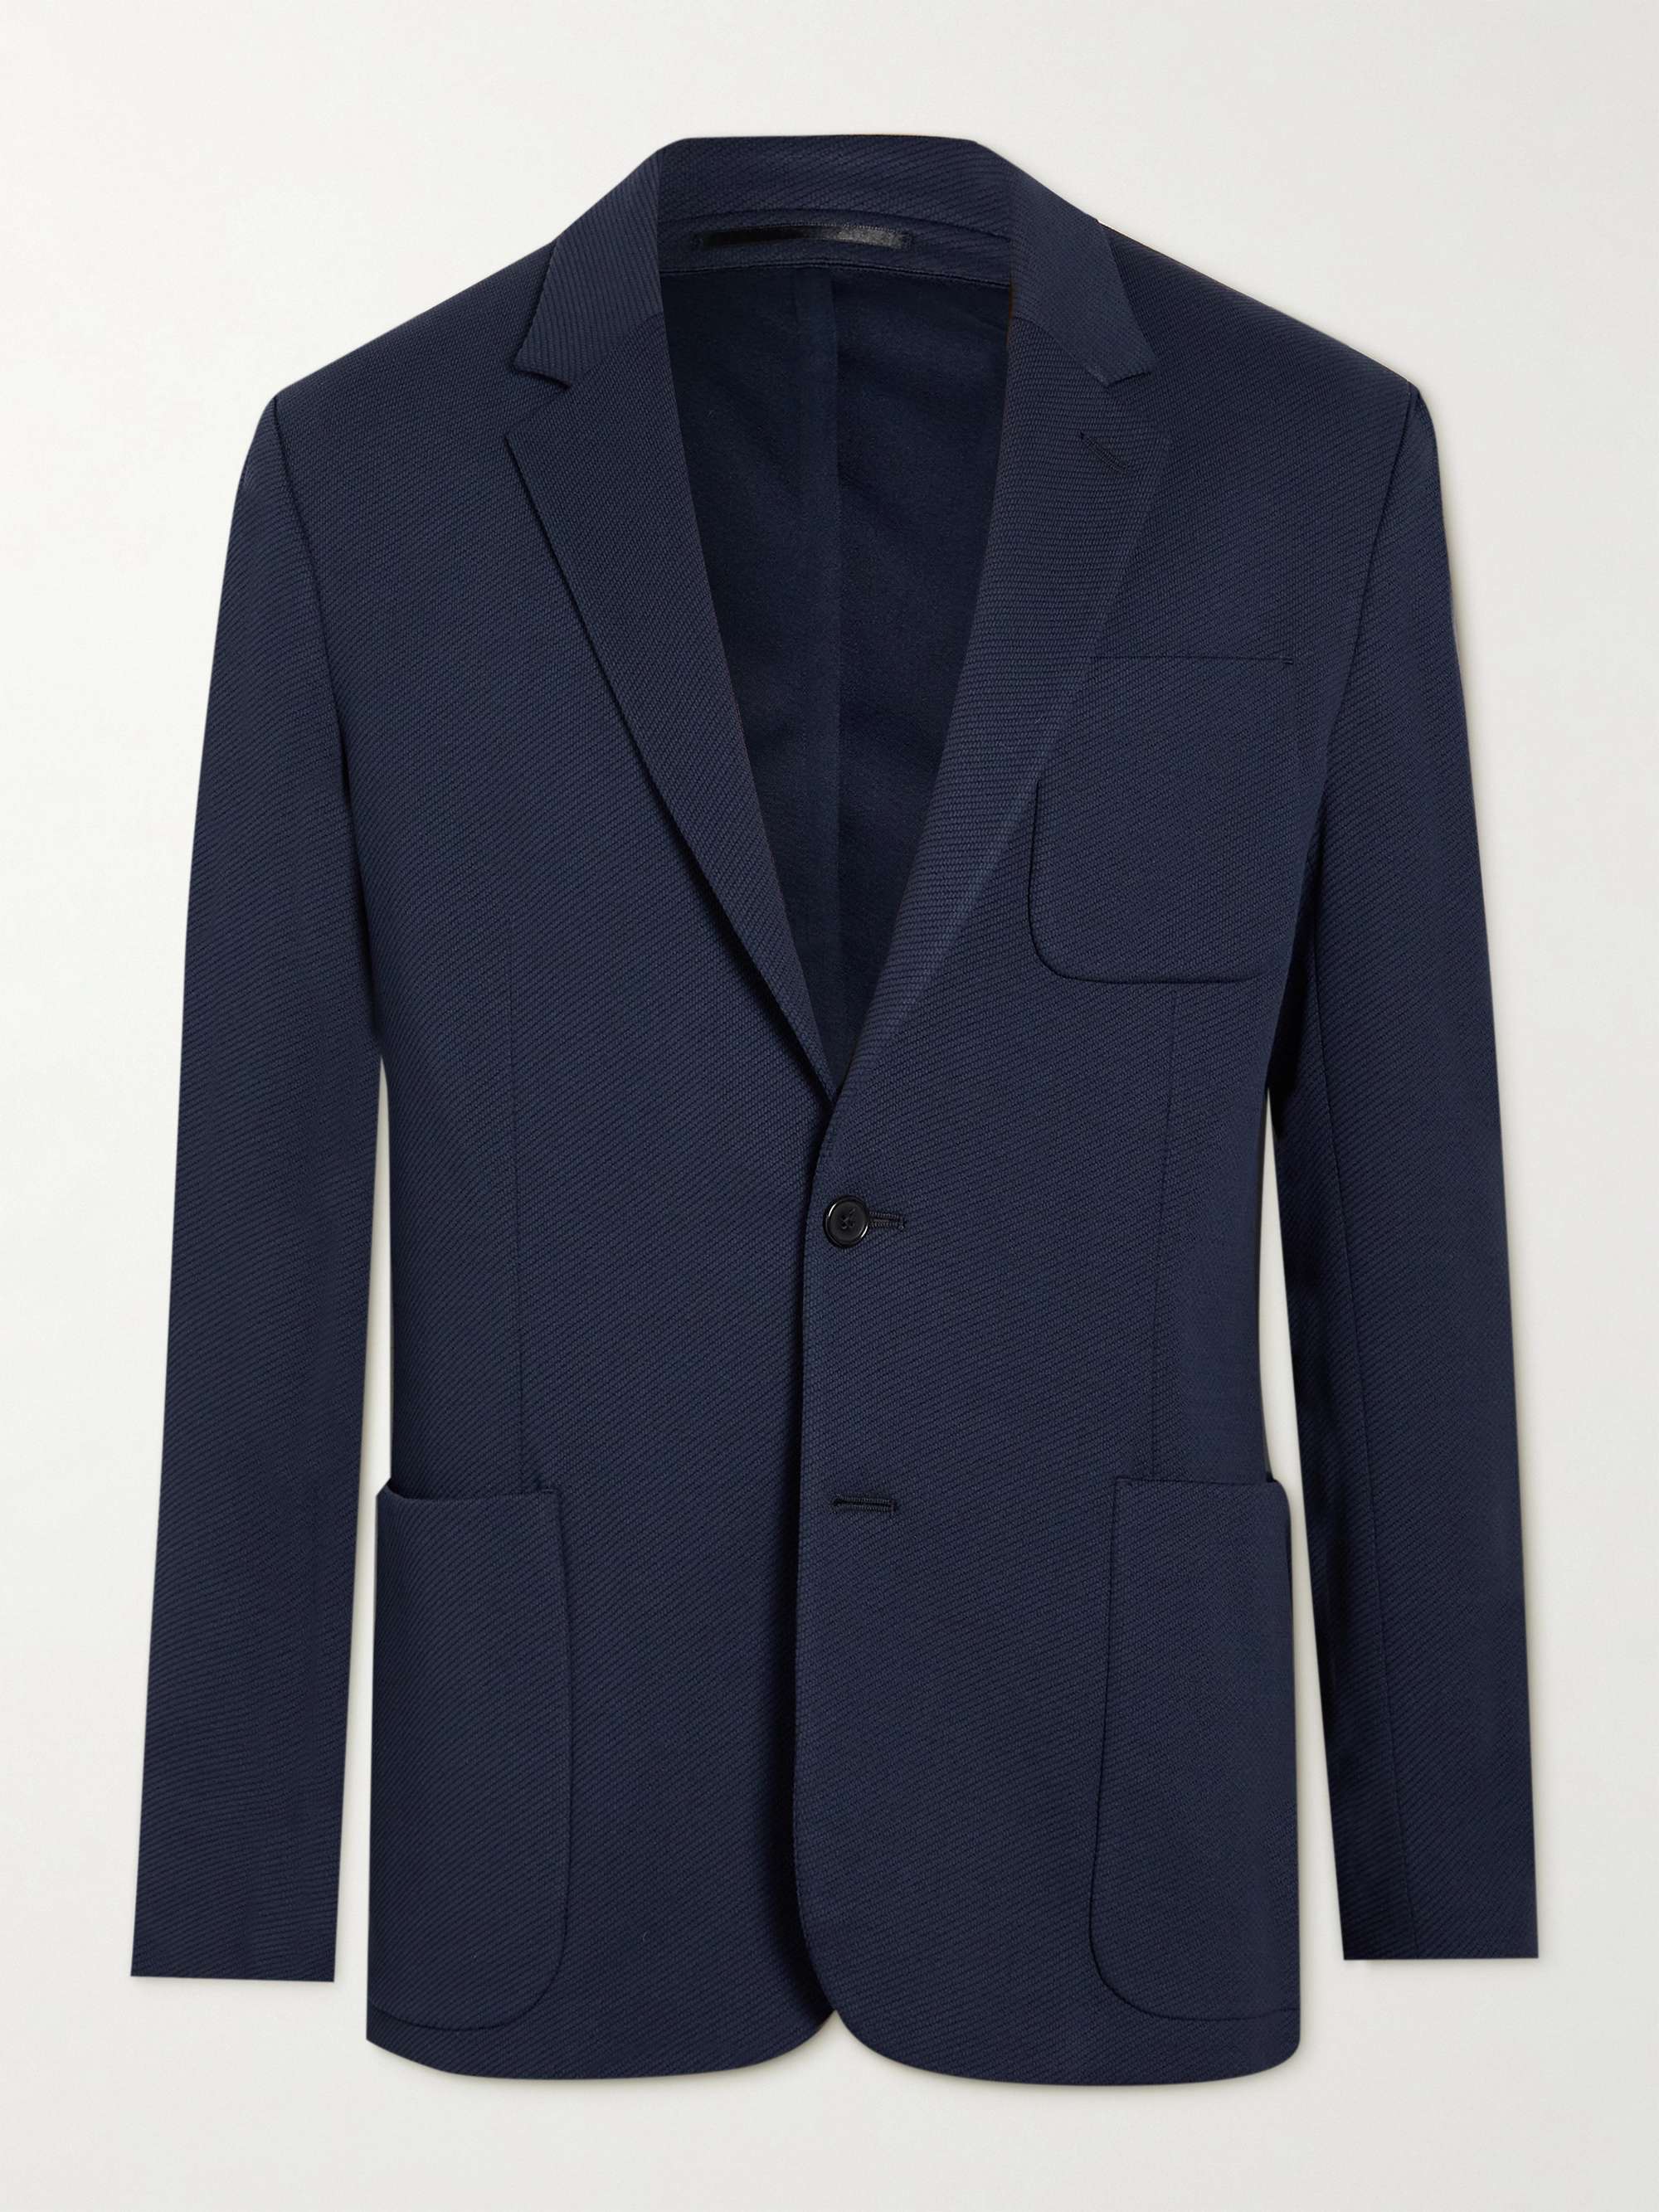 PAUL SMITH Unstructured Jersey Suit Jacket